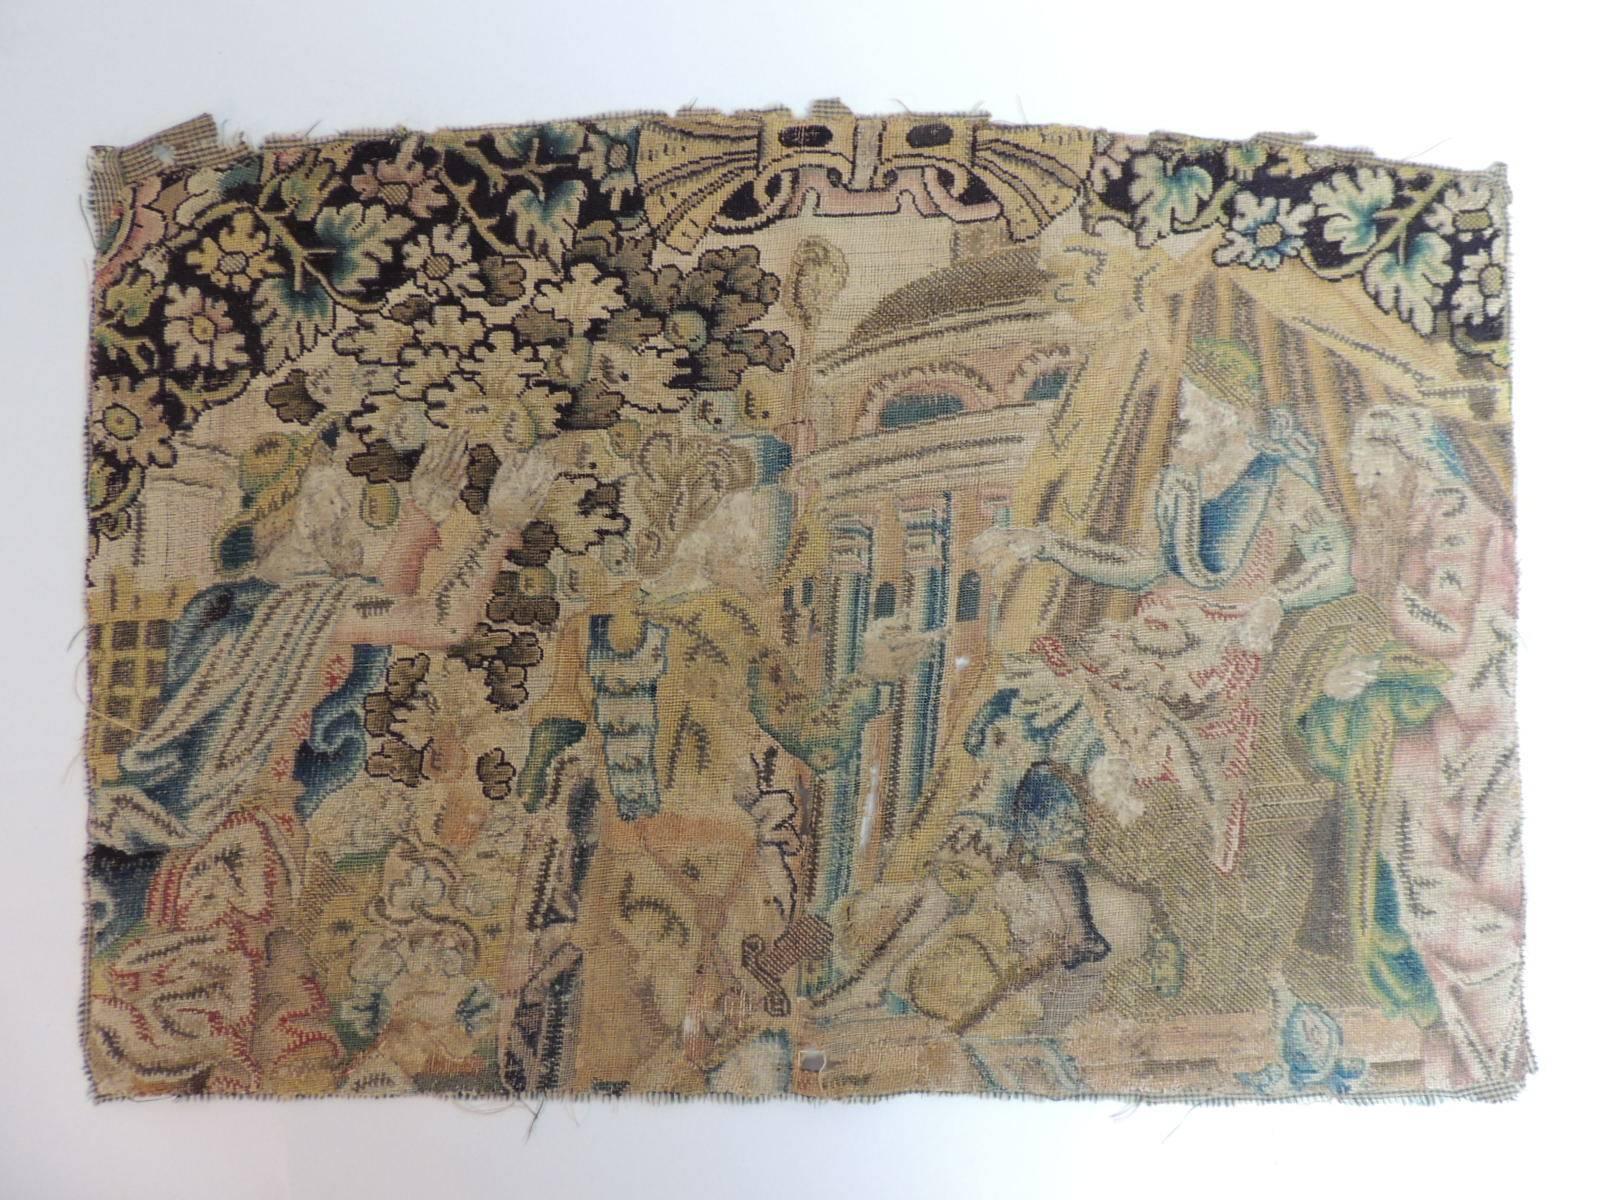 Offered by the Antique Textiles Galleries:
Antique embroidery tapestry panel finely tent-stitched with polychrome silk threads. The background worked in an array of exotic trees on a town main square. The fine embroidery of this antique tapestry